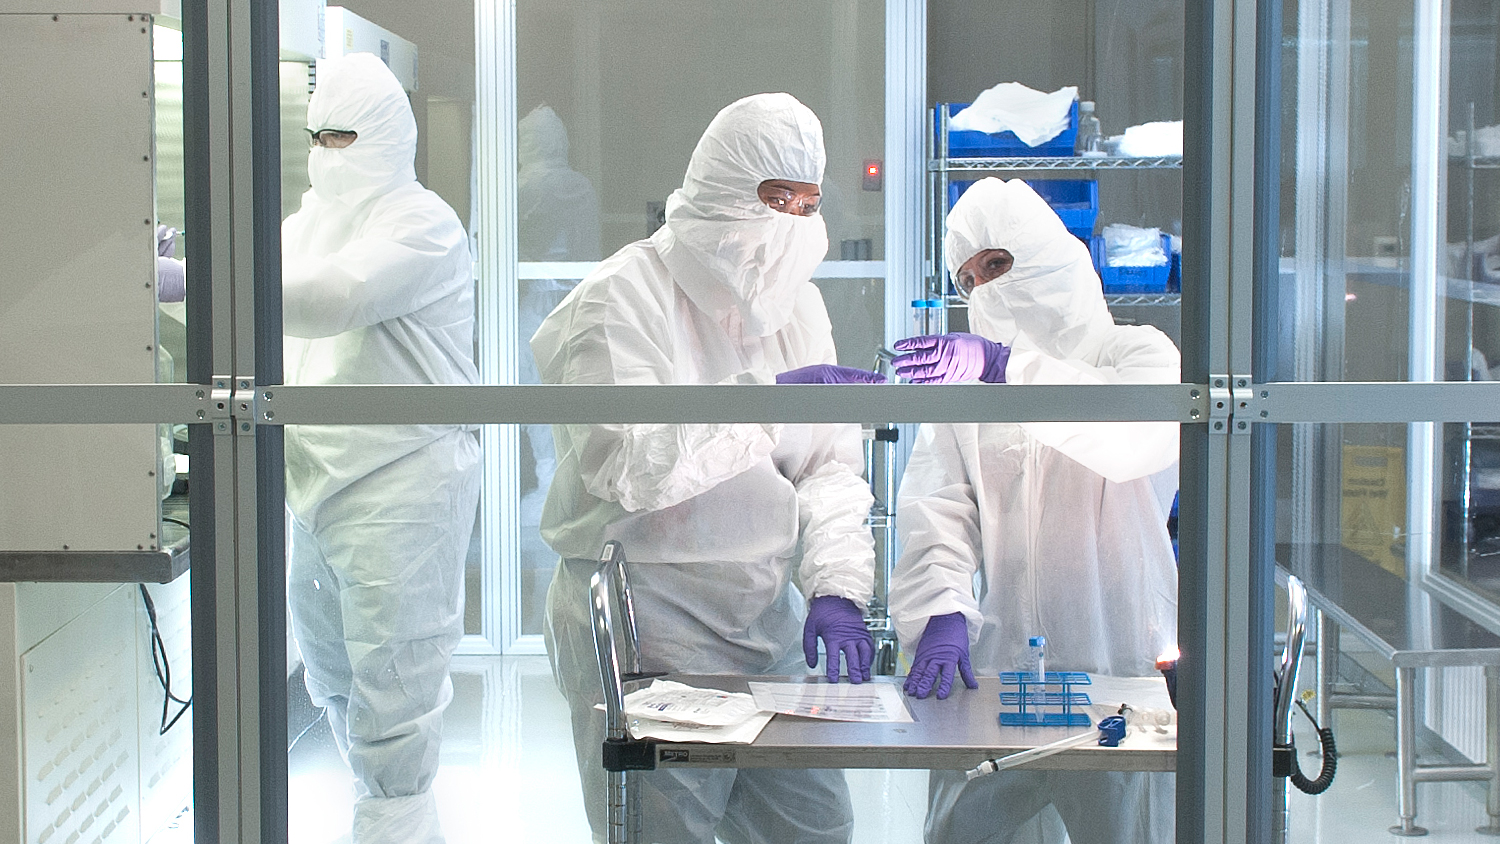 Researchers work in clean room